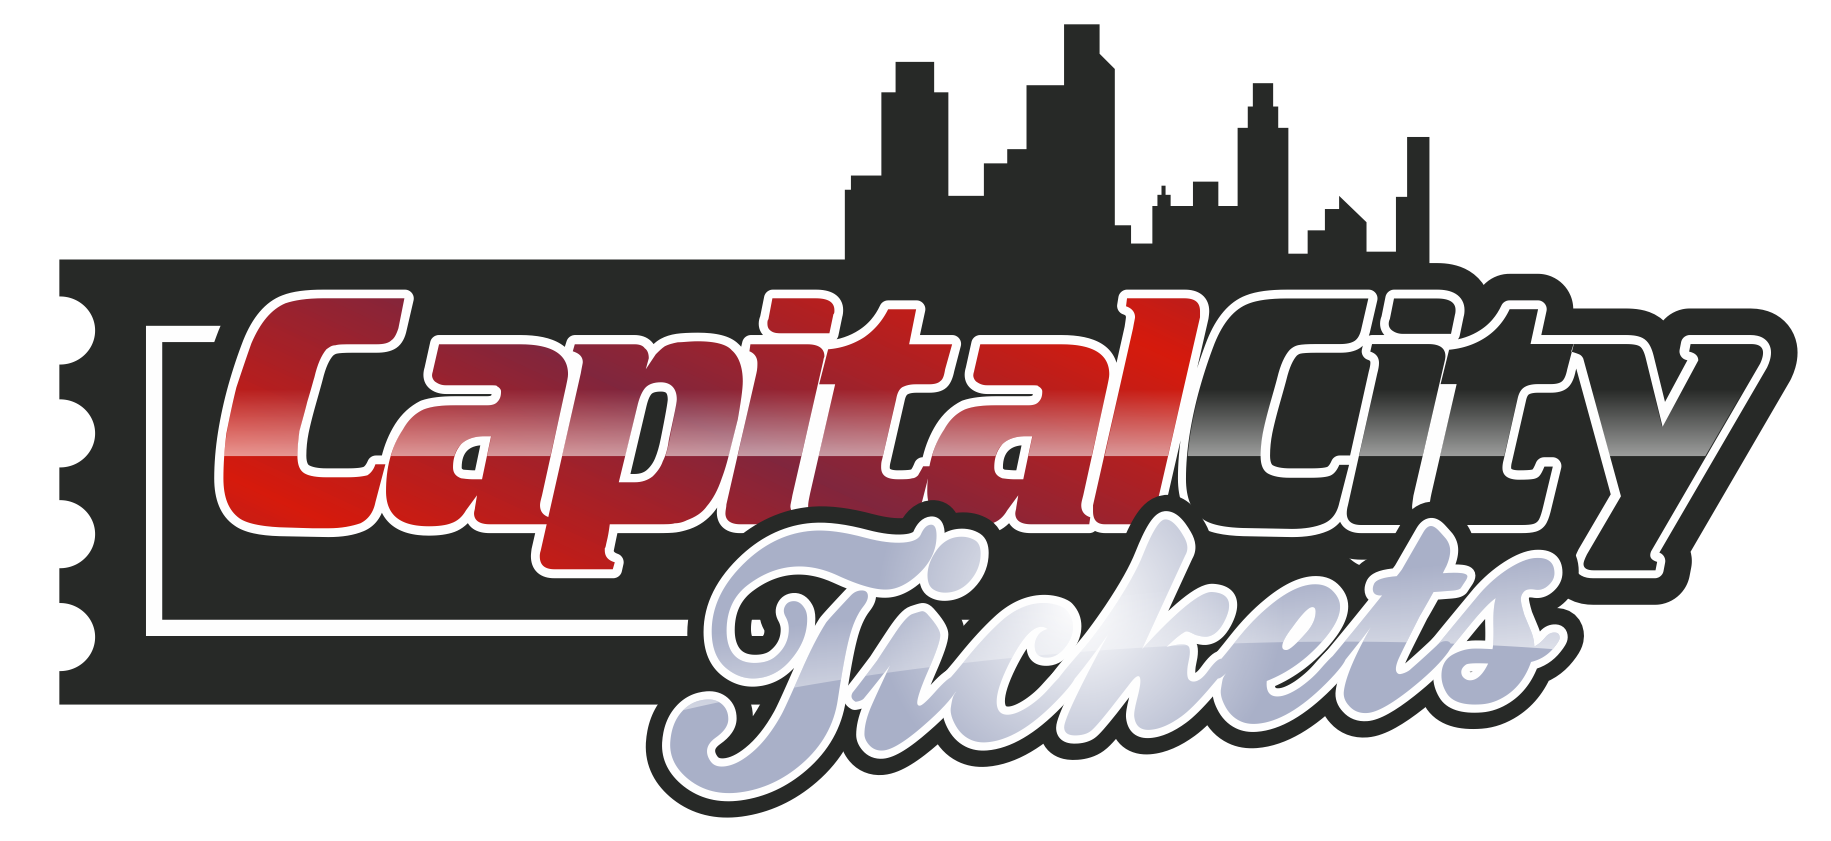 Save on 2021-22 Atlanta Hawks Basketball Tickets for Center Court, Upper, Lower, and Club Seating Online with Promo Code at Capital City Tickets - See Schedules, Seating Charts, and Game Dates